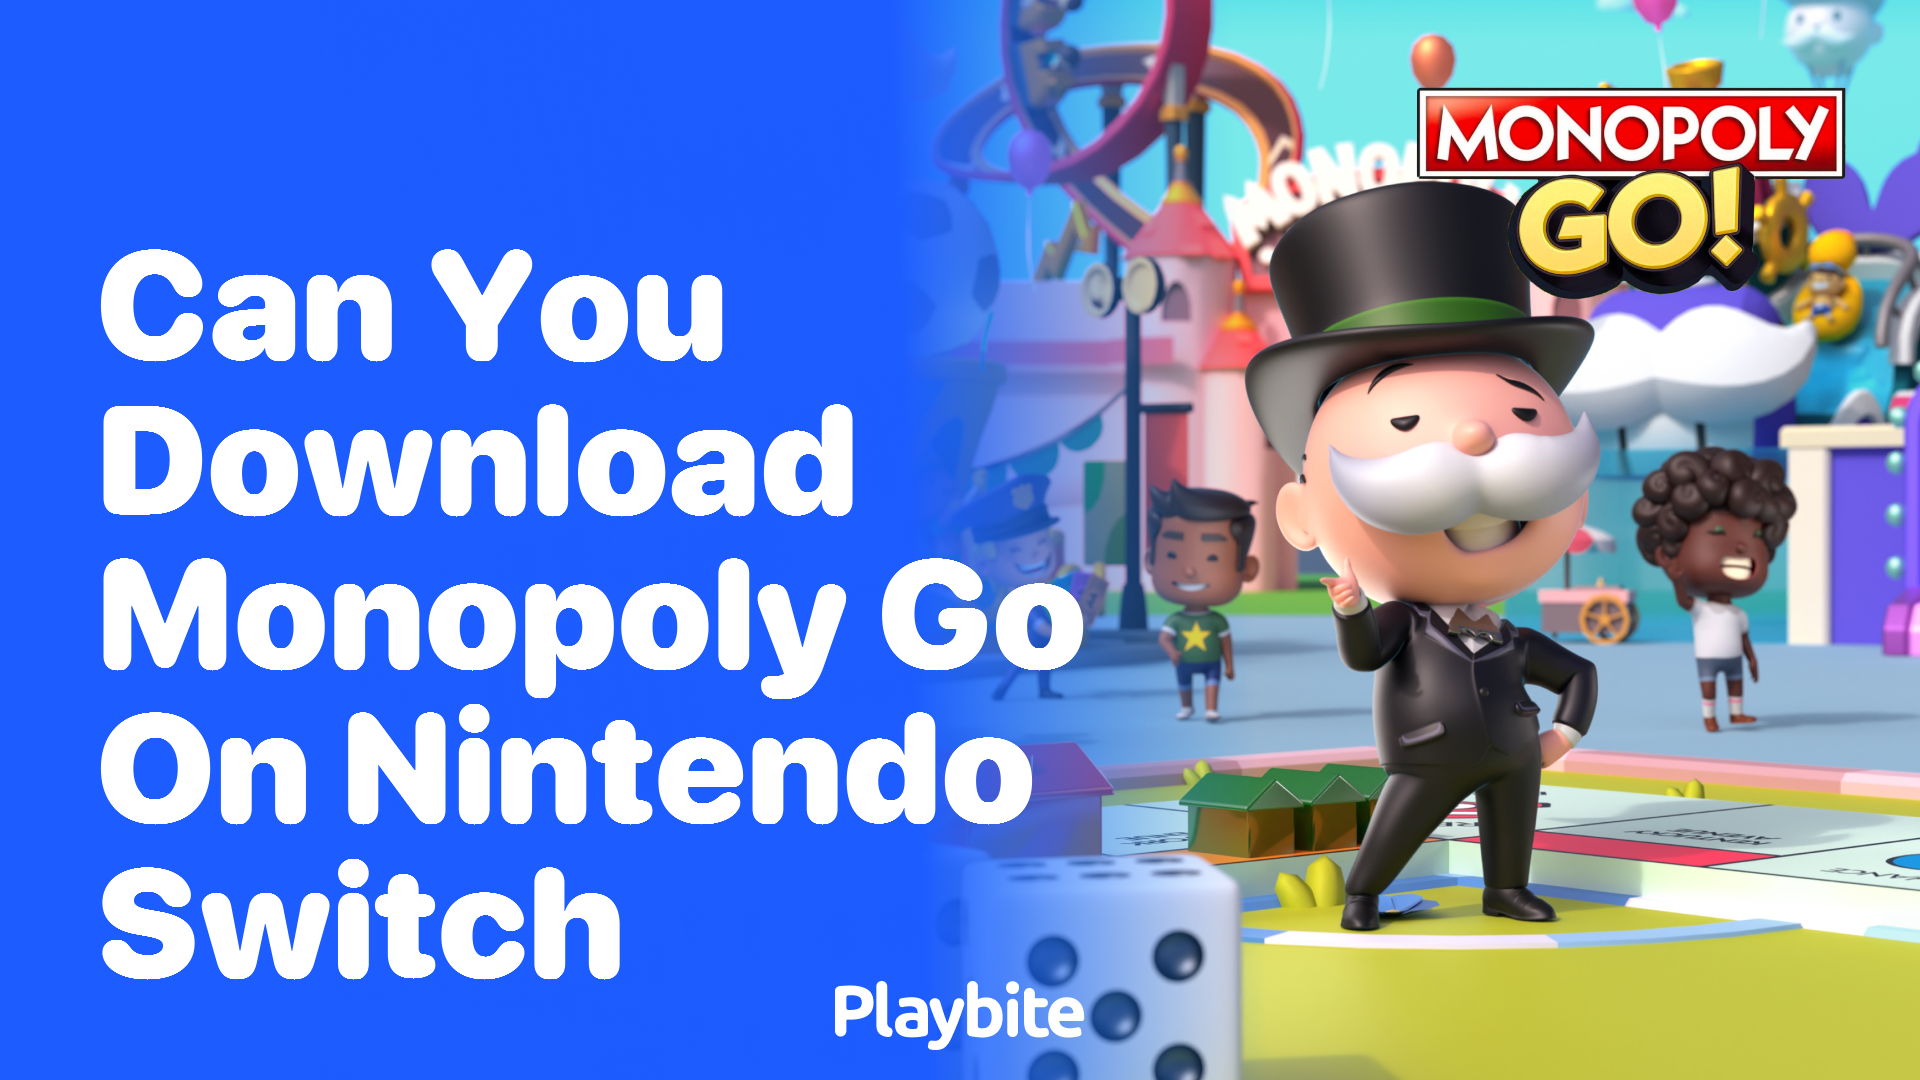 Can You Download Monopoly Go on Nintendo Switch?